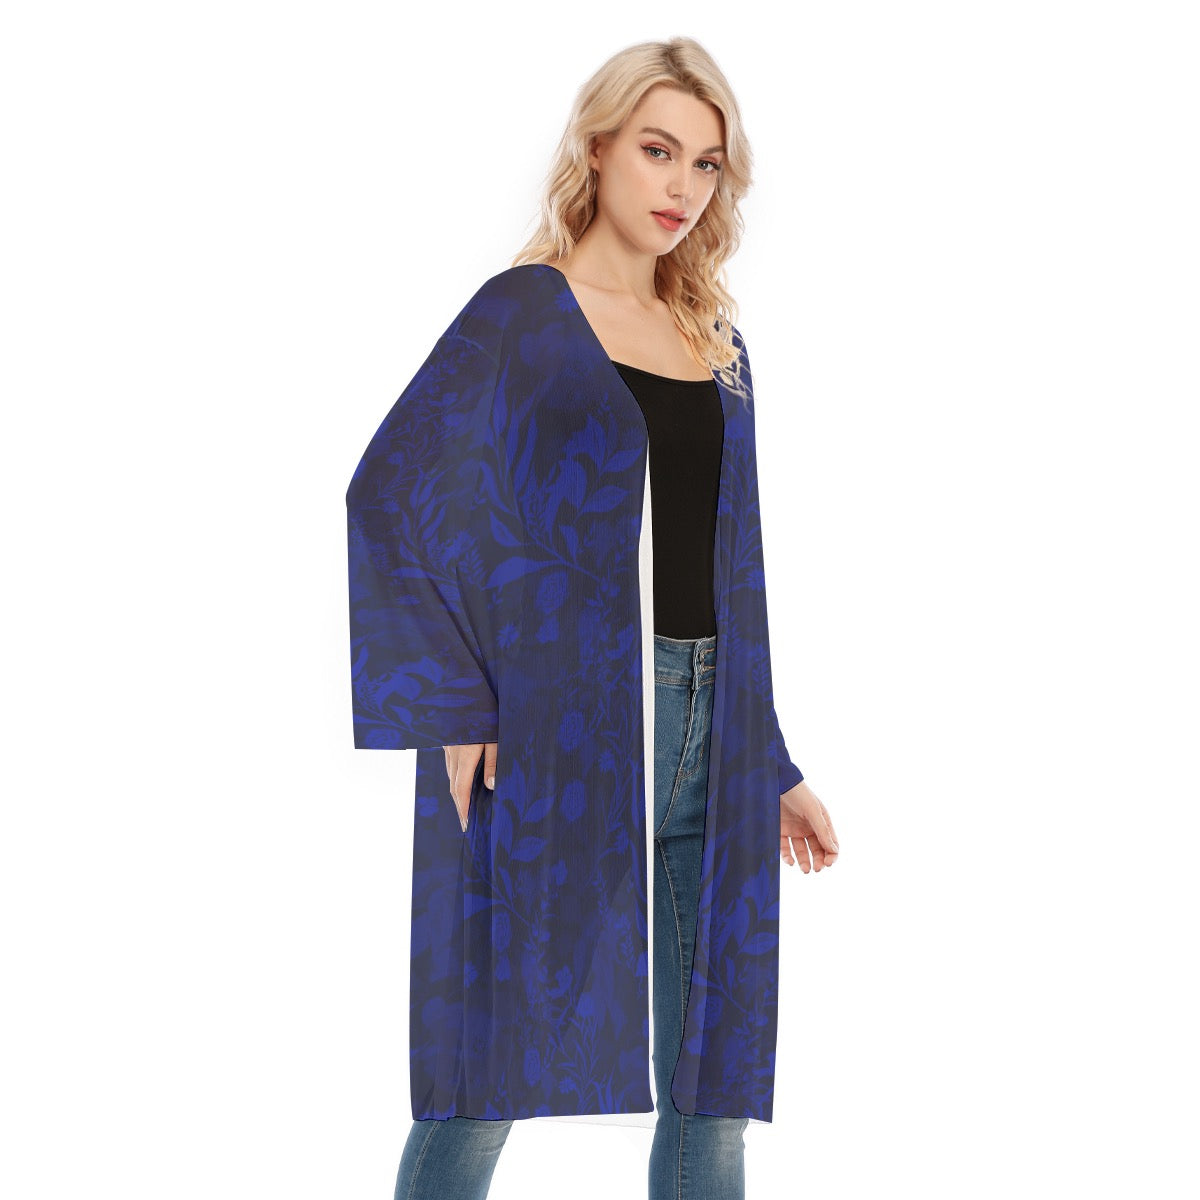 Caracas Collection Blue Long Sleeve Mesh Cardigan. Mesh Kimono. Cover up. Design hand-painted by the Designer Maria Alejandra Echenique